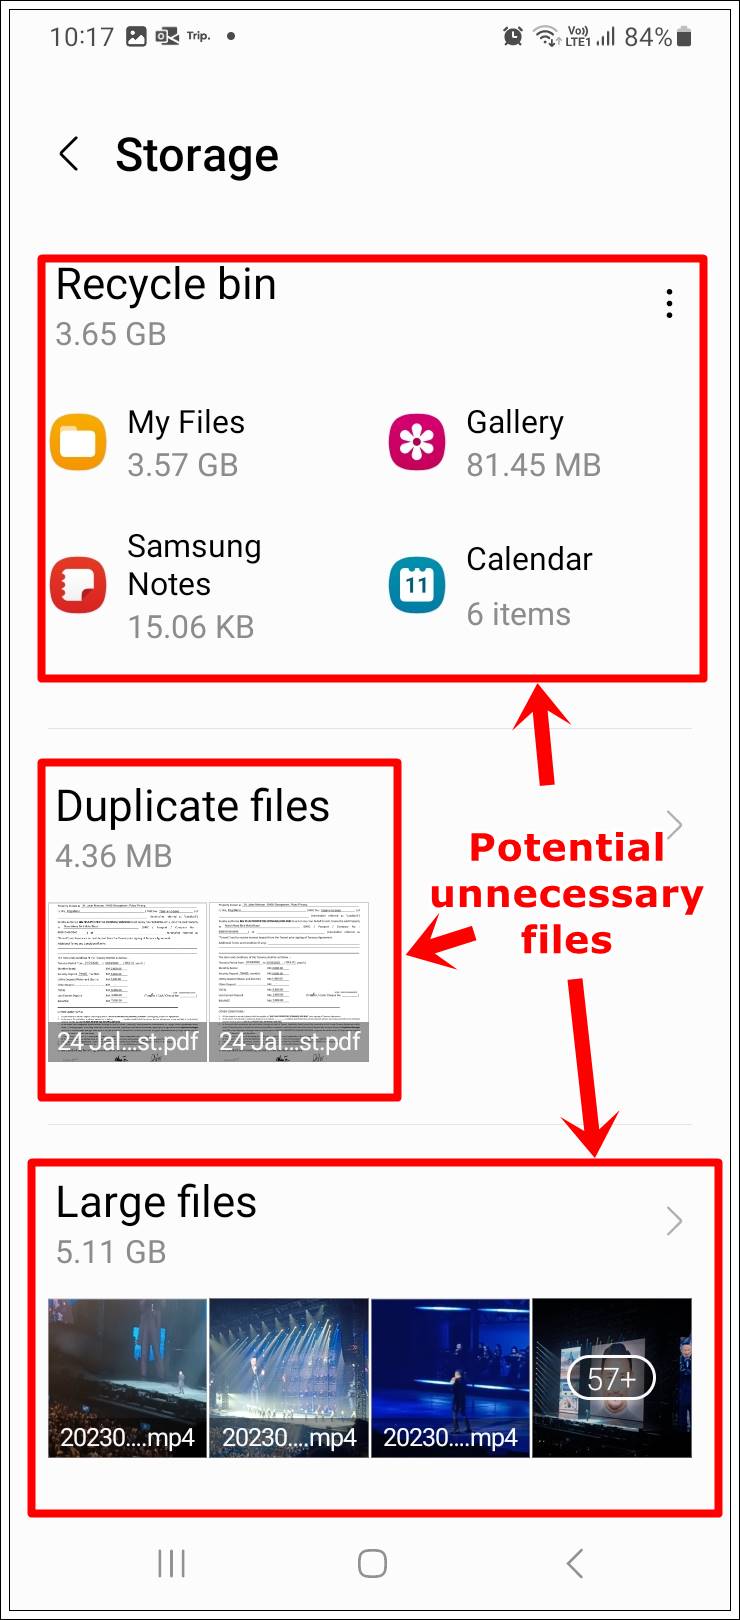 This image shows a screenshot of a Samsung Galaxy phone's 'Storage' page with the 'Recycle Bin', 'Duplicate Files' and 'Large Files' options highlighted. These are potential unnecessary files that can be deleted to free up some storage space.